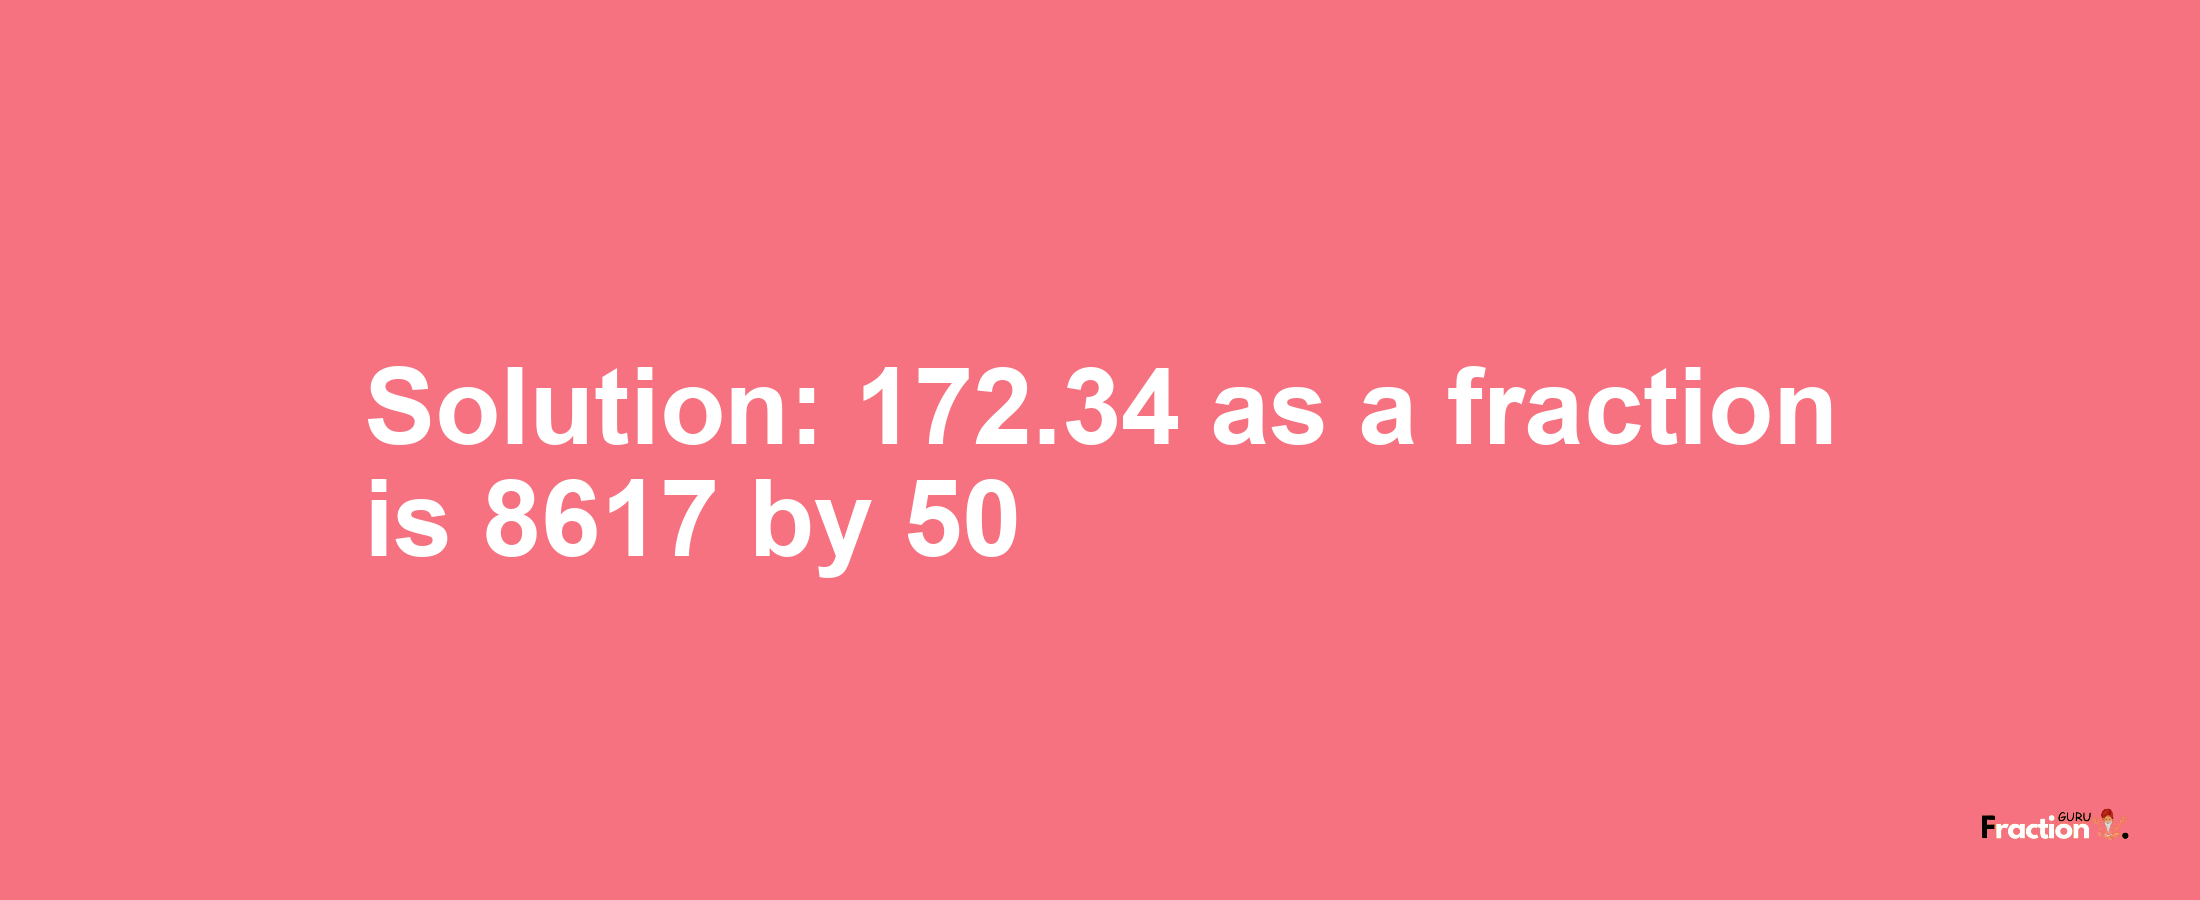 Solution:172.34 as a fraction is 8617/50